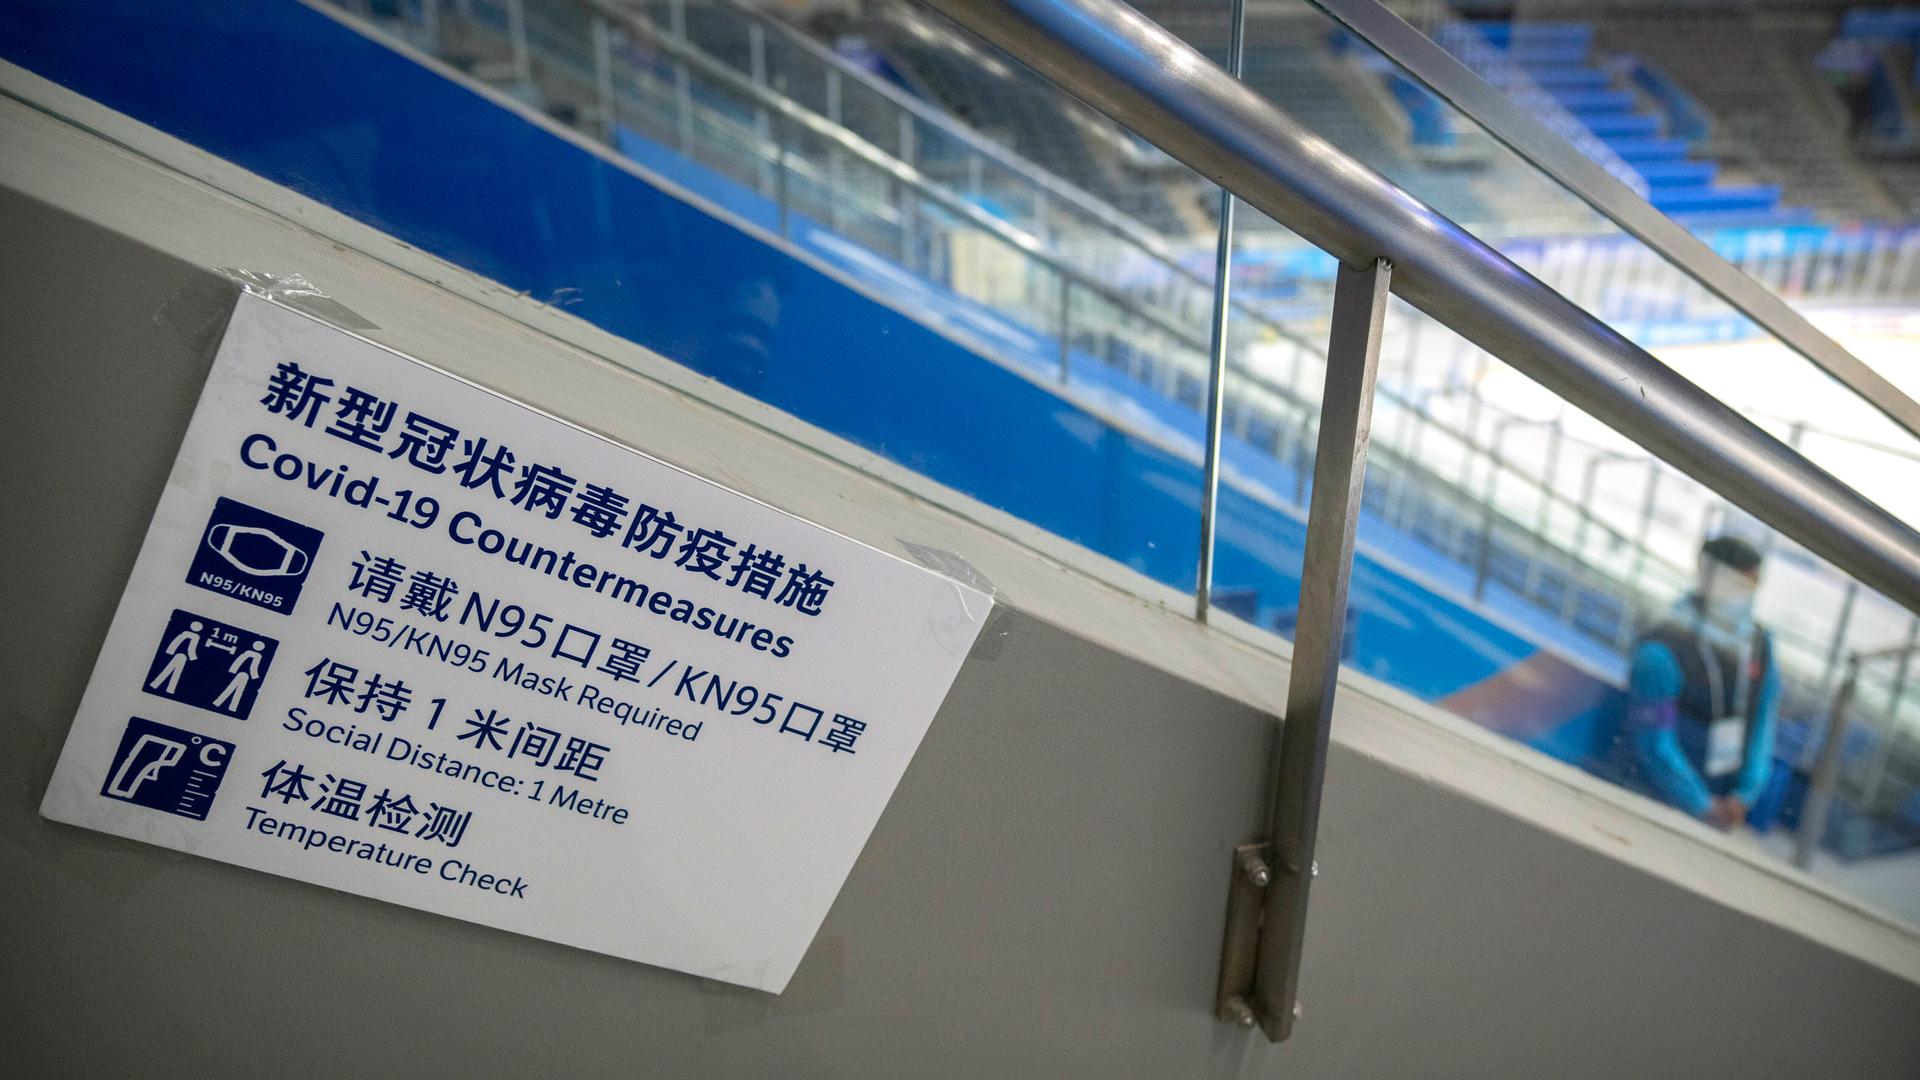 A staff member stands near a sign outlining COVID-19 protection measures during the Experience Beijing Ice Hockey Domestic Test Activity, a test event for the 2022 Beijing Winter Olympics, at the National Indoor Stadium in Beijing, on Nov. 10, 2021.